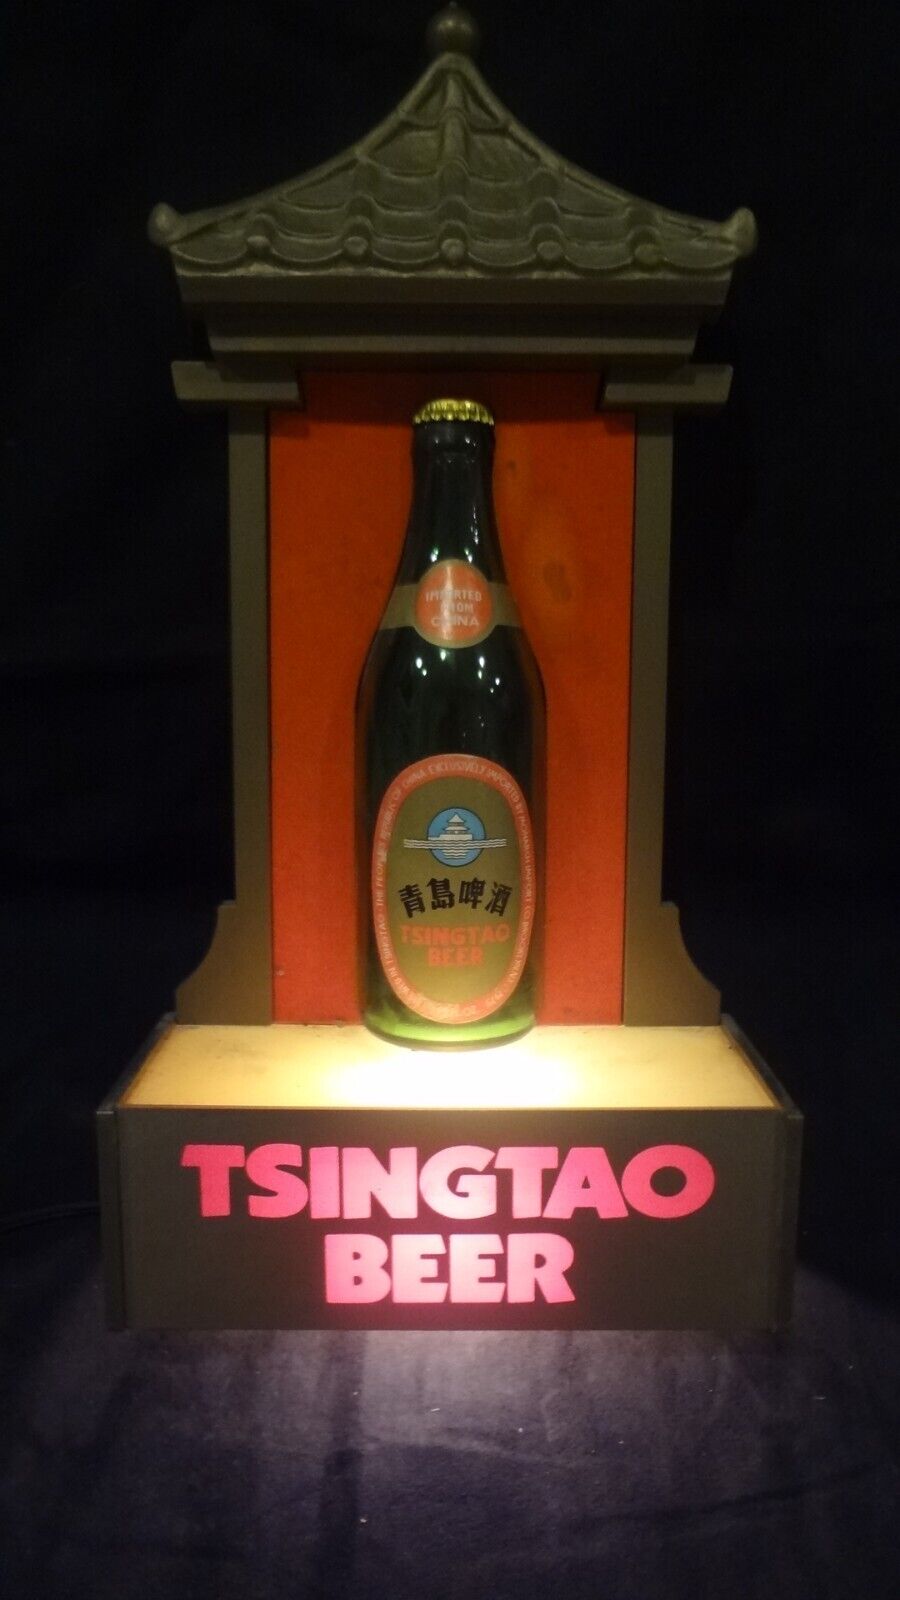 VTG TSINGTAO Beer Sign - Actual bottle - Lights Up -  Extremely Rare